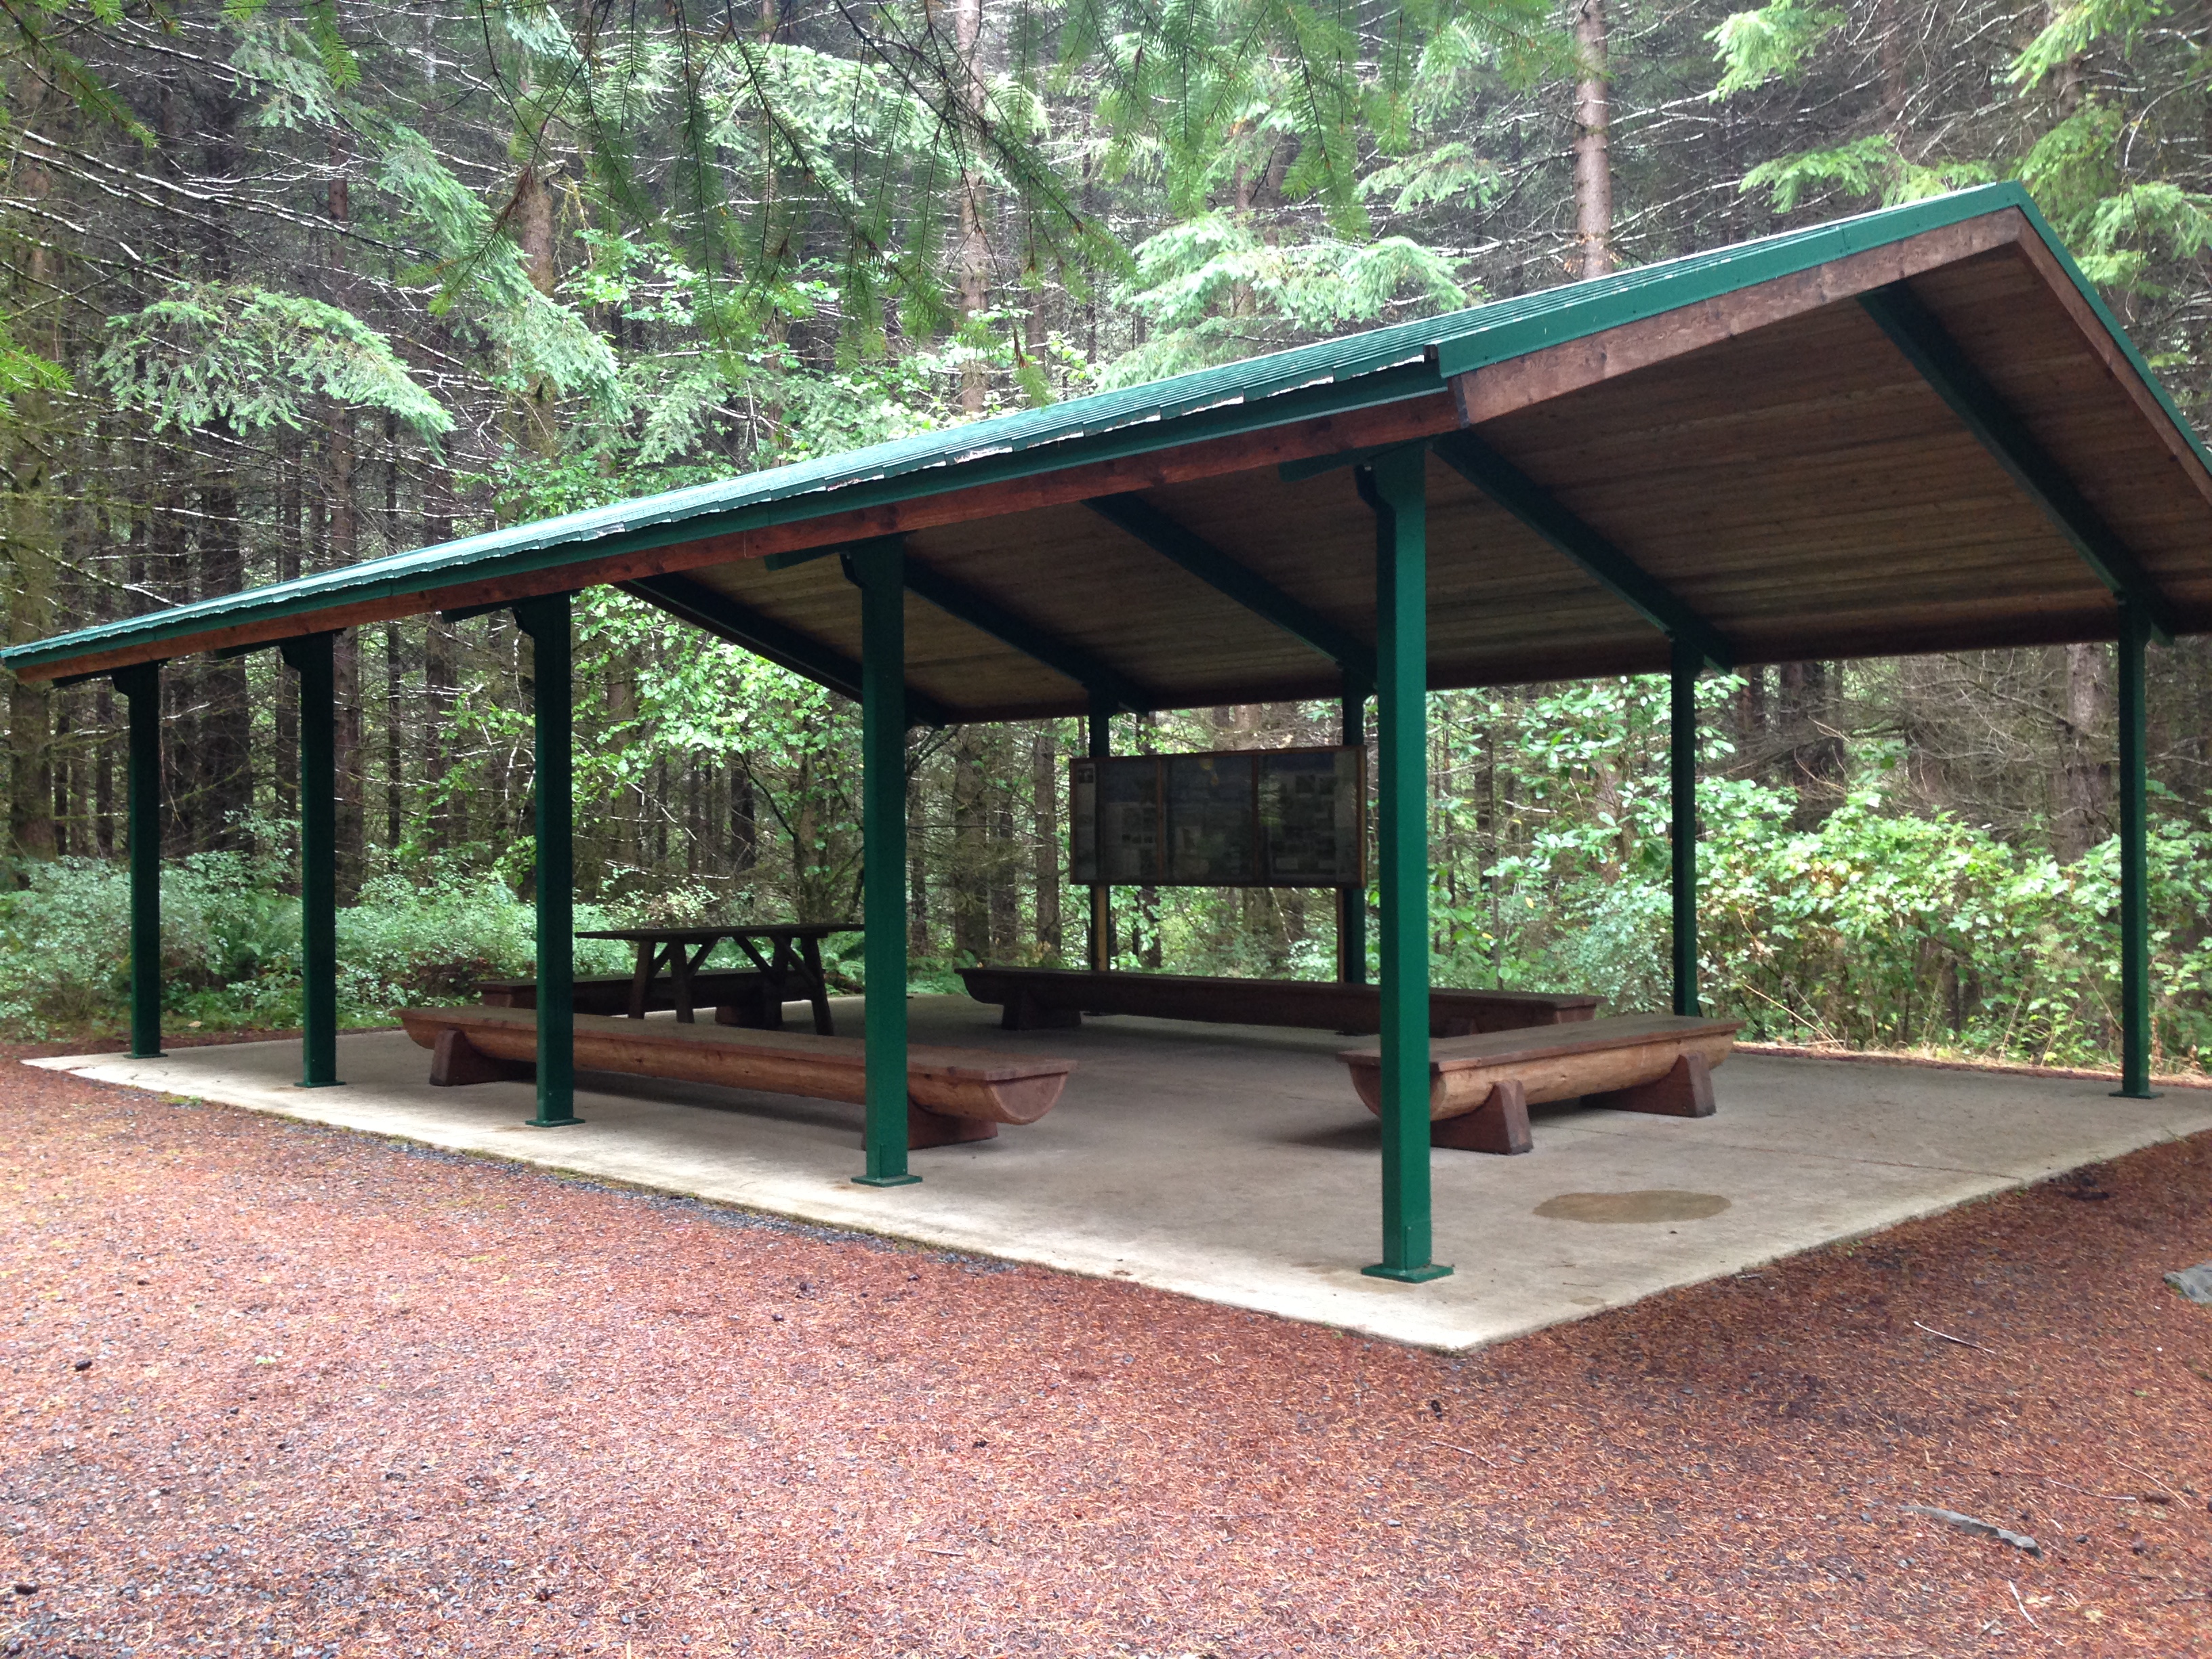 Students can have lunch in our covered shelter